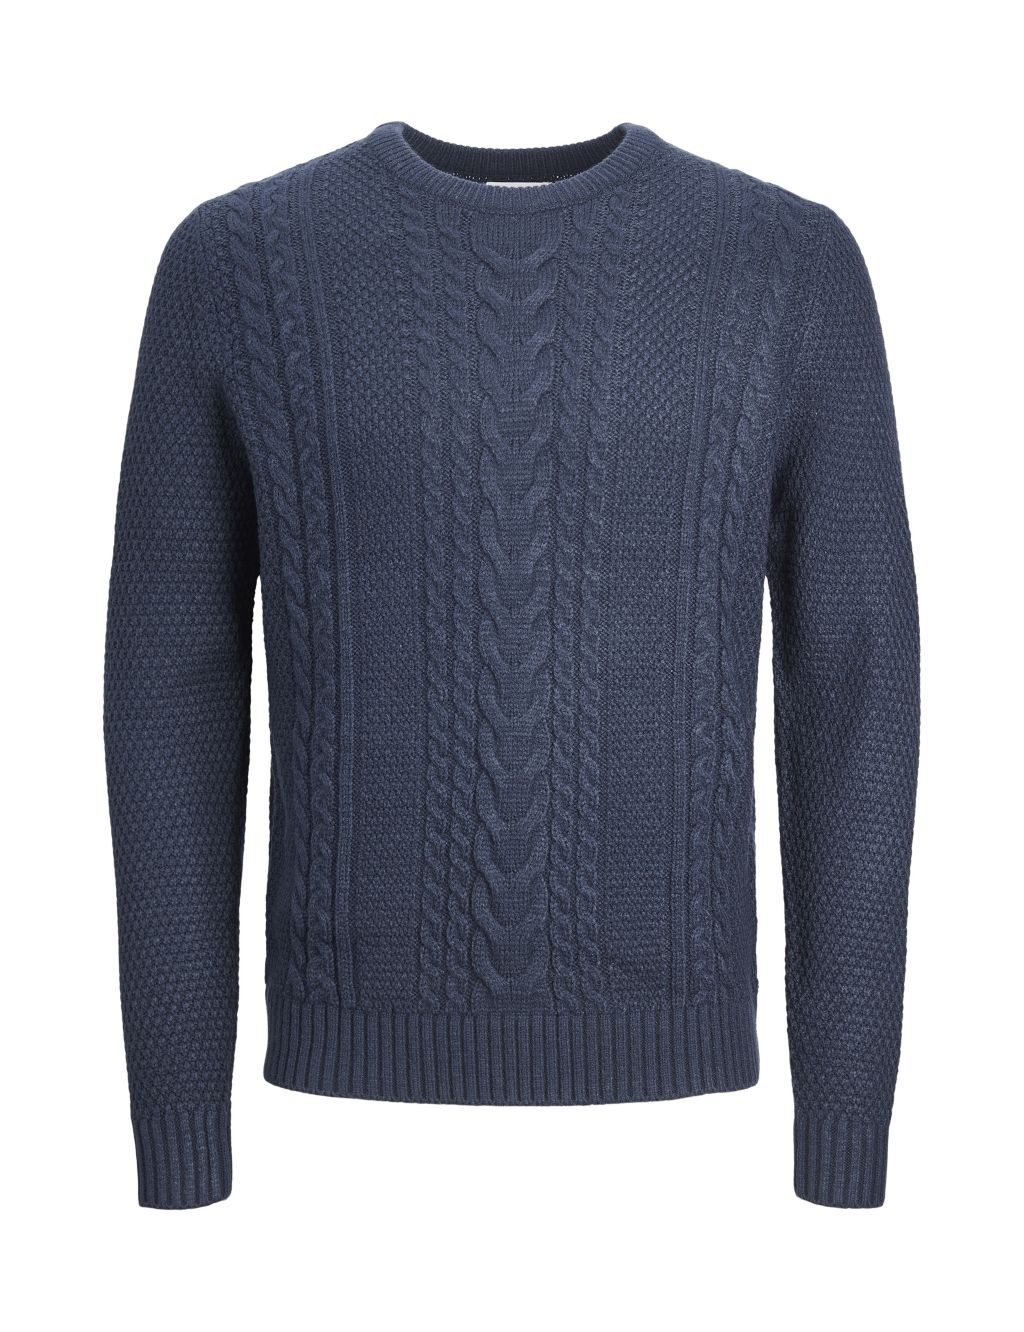 Textured Cable Crew Neck Jumper with Cotton image 2